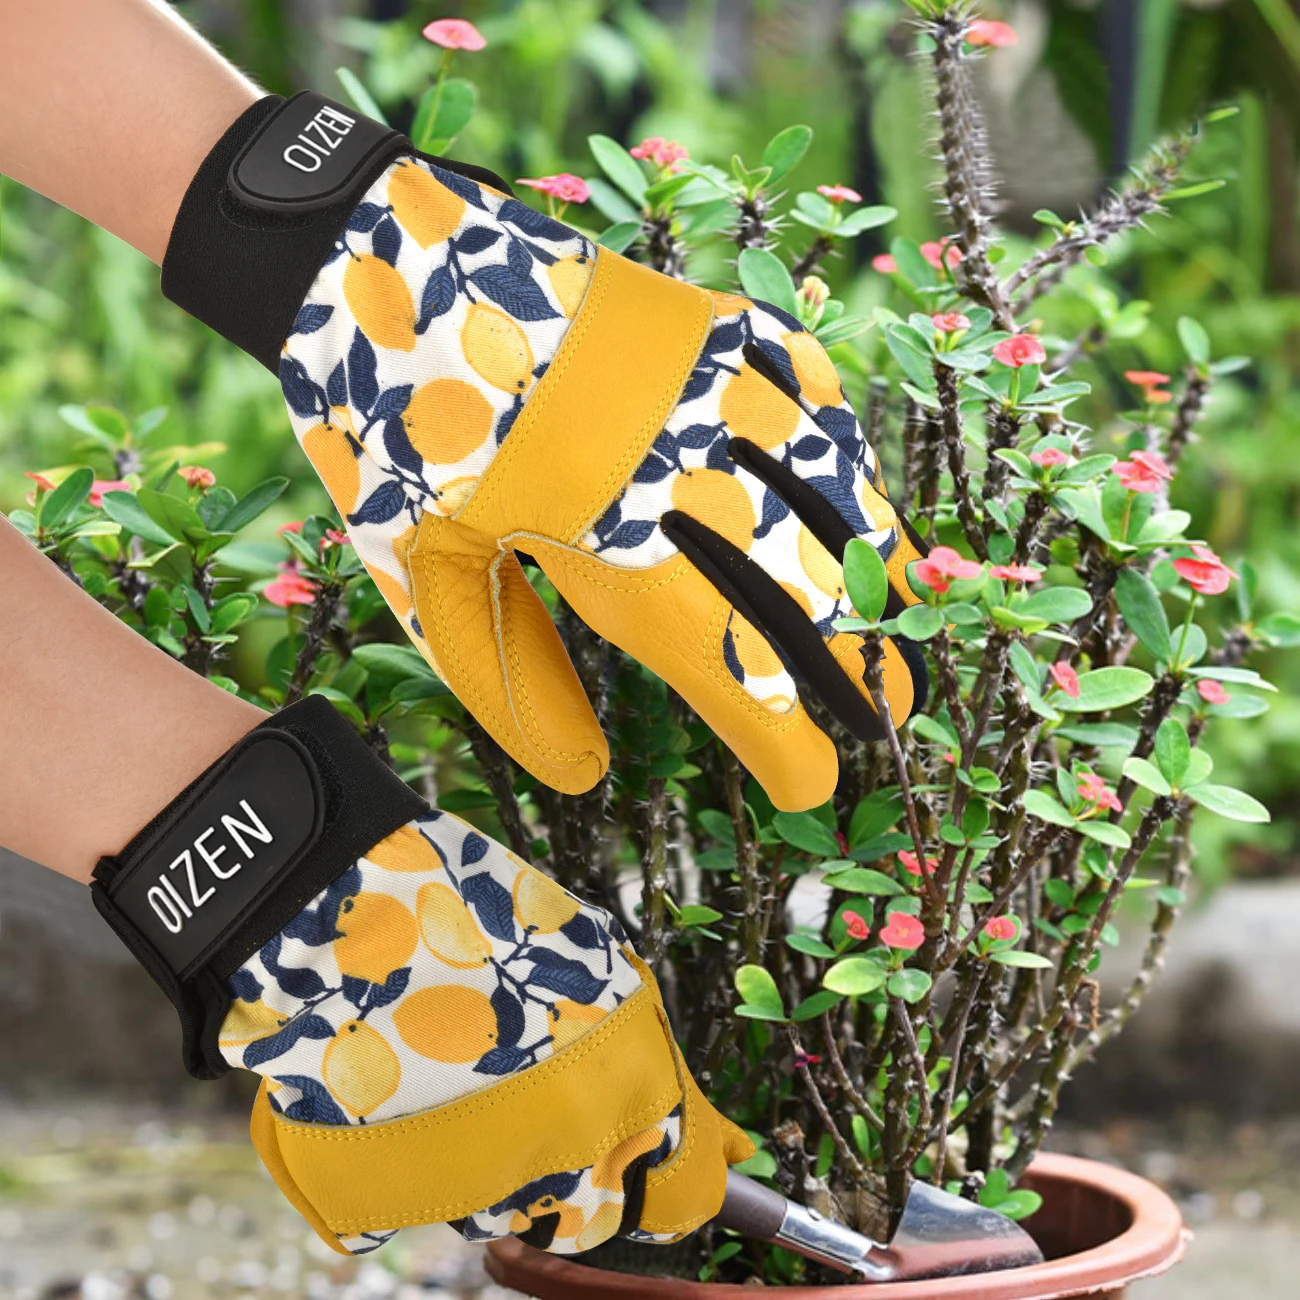 Garden Gloves for Women Cowhide Leather Cactus Gloves Gardening Digging Planting Thorn Proof Durable Work Glove Outdoor